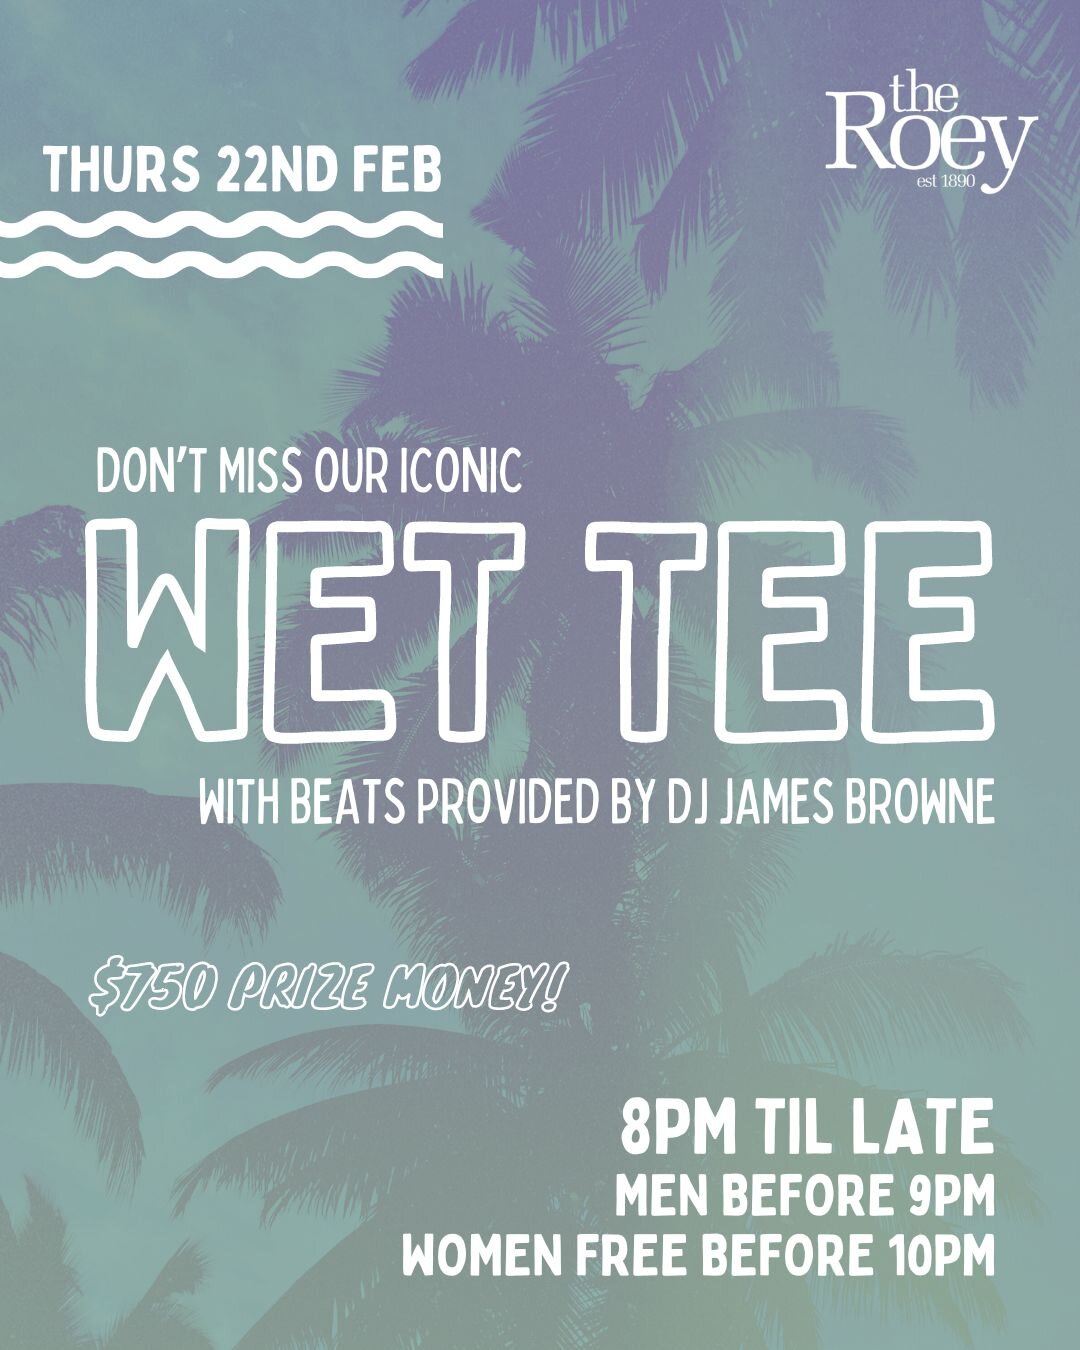 Our iconic WET TEE takes over Oasis for another round TONIGHT!

Tonight's water pouring beats will be layed down by DJ JAMES BROWNE, $750 CASH MONEY on the line for the lady who can impress our crowd the most in this week's comp 💦

Doors open 8pm
🕺